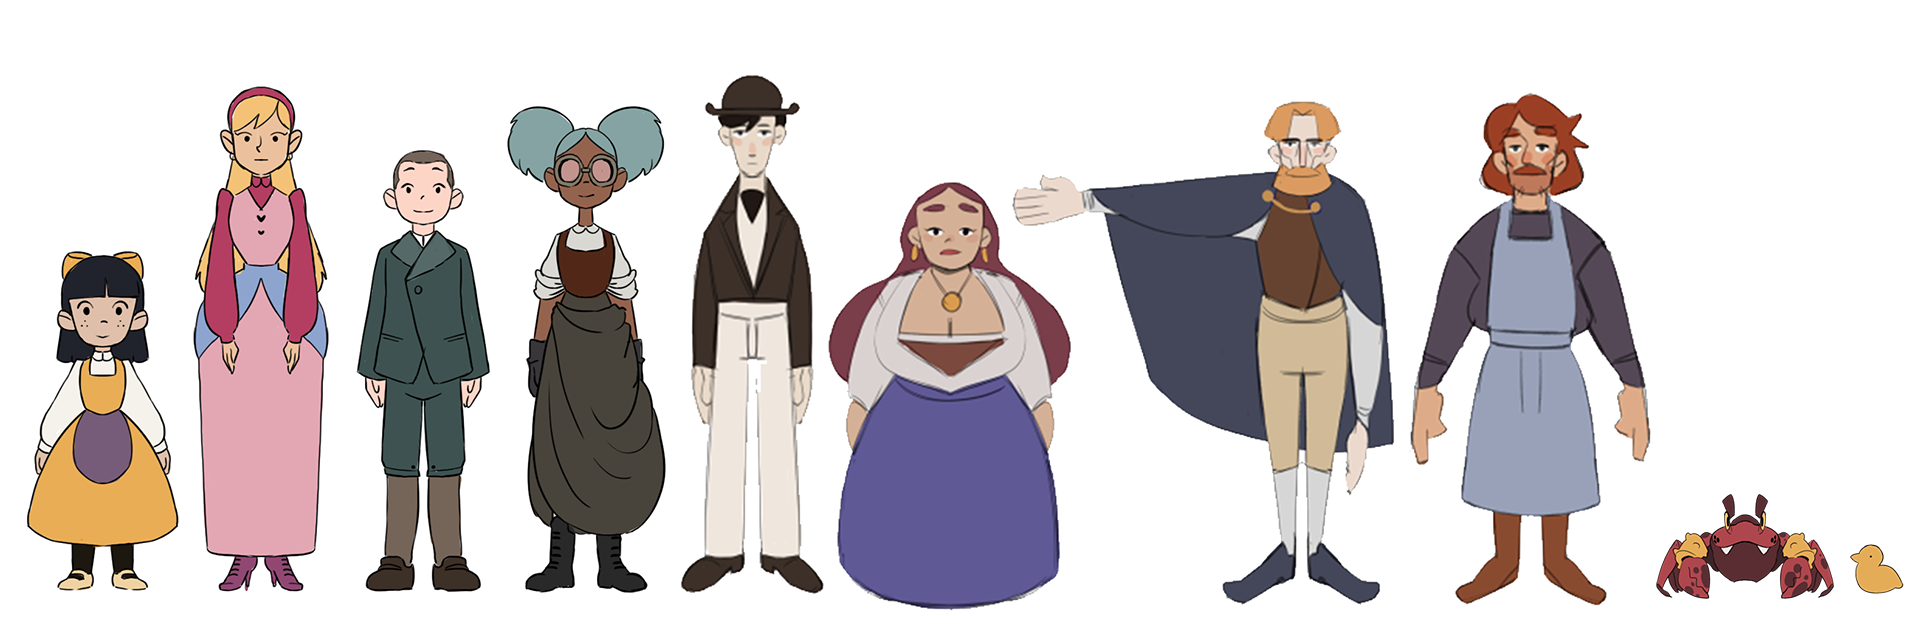 Lineup of the main characters from other film made by the class during the same year. In order from left to right: Quand les pruniers pleurent, Broken heart factory, Rouge brique, Orange, Butterfly, Tide of change, Cambradin, Six pieds sous mer, La chasse.